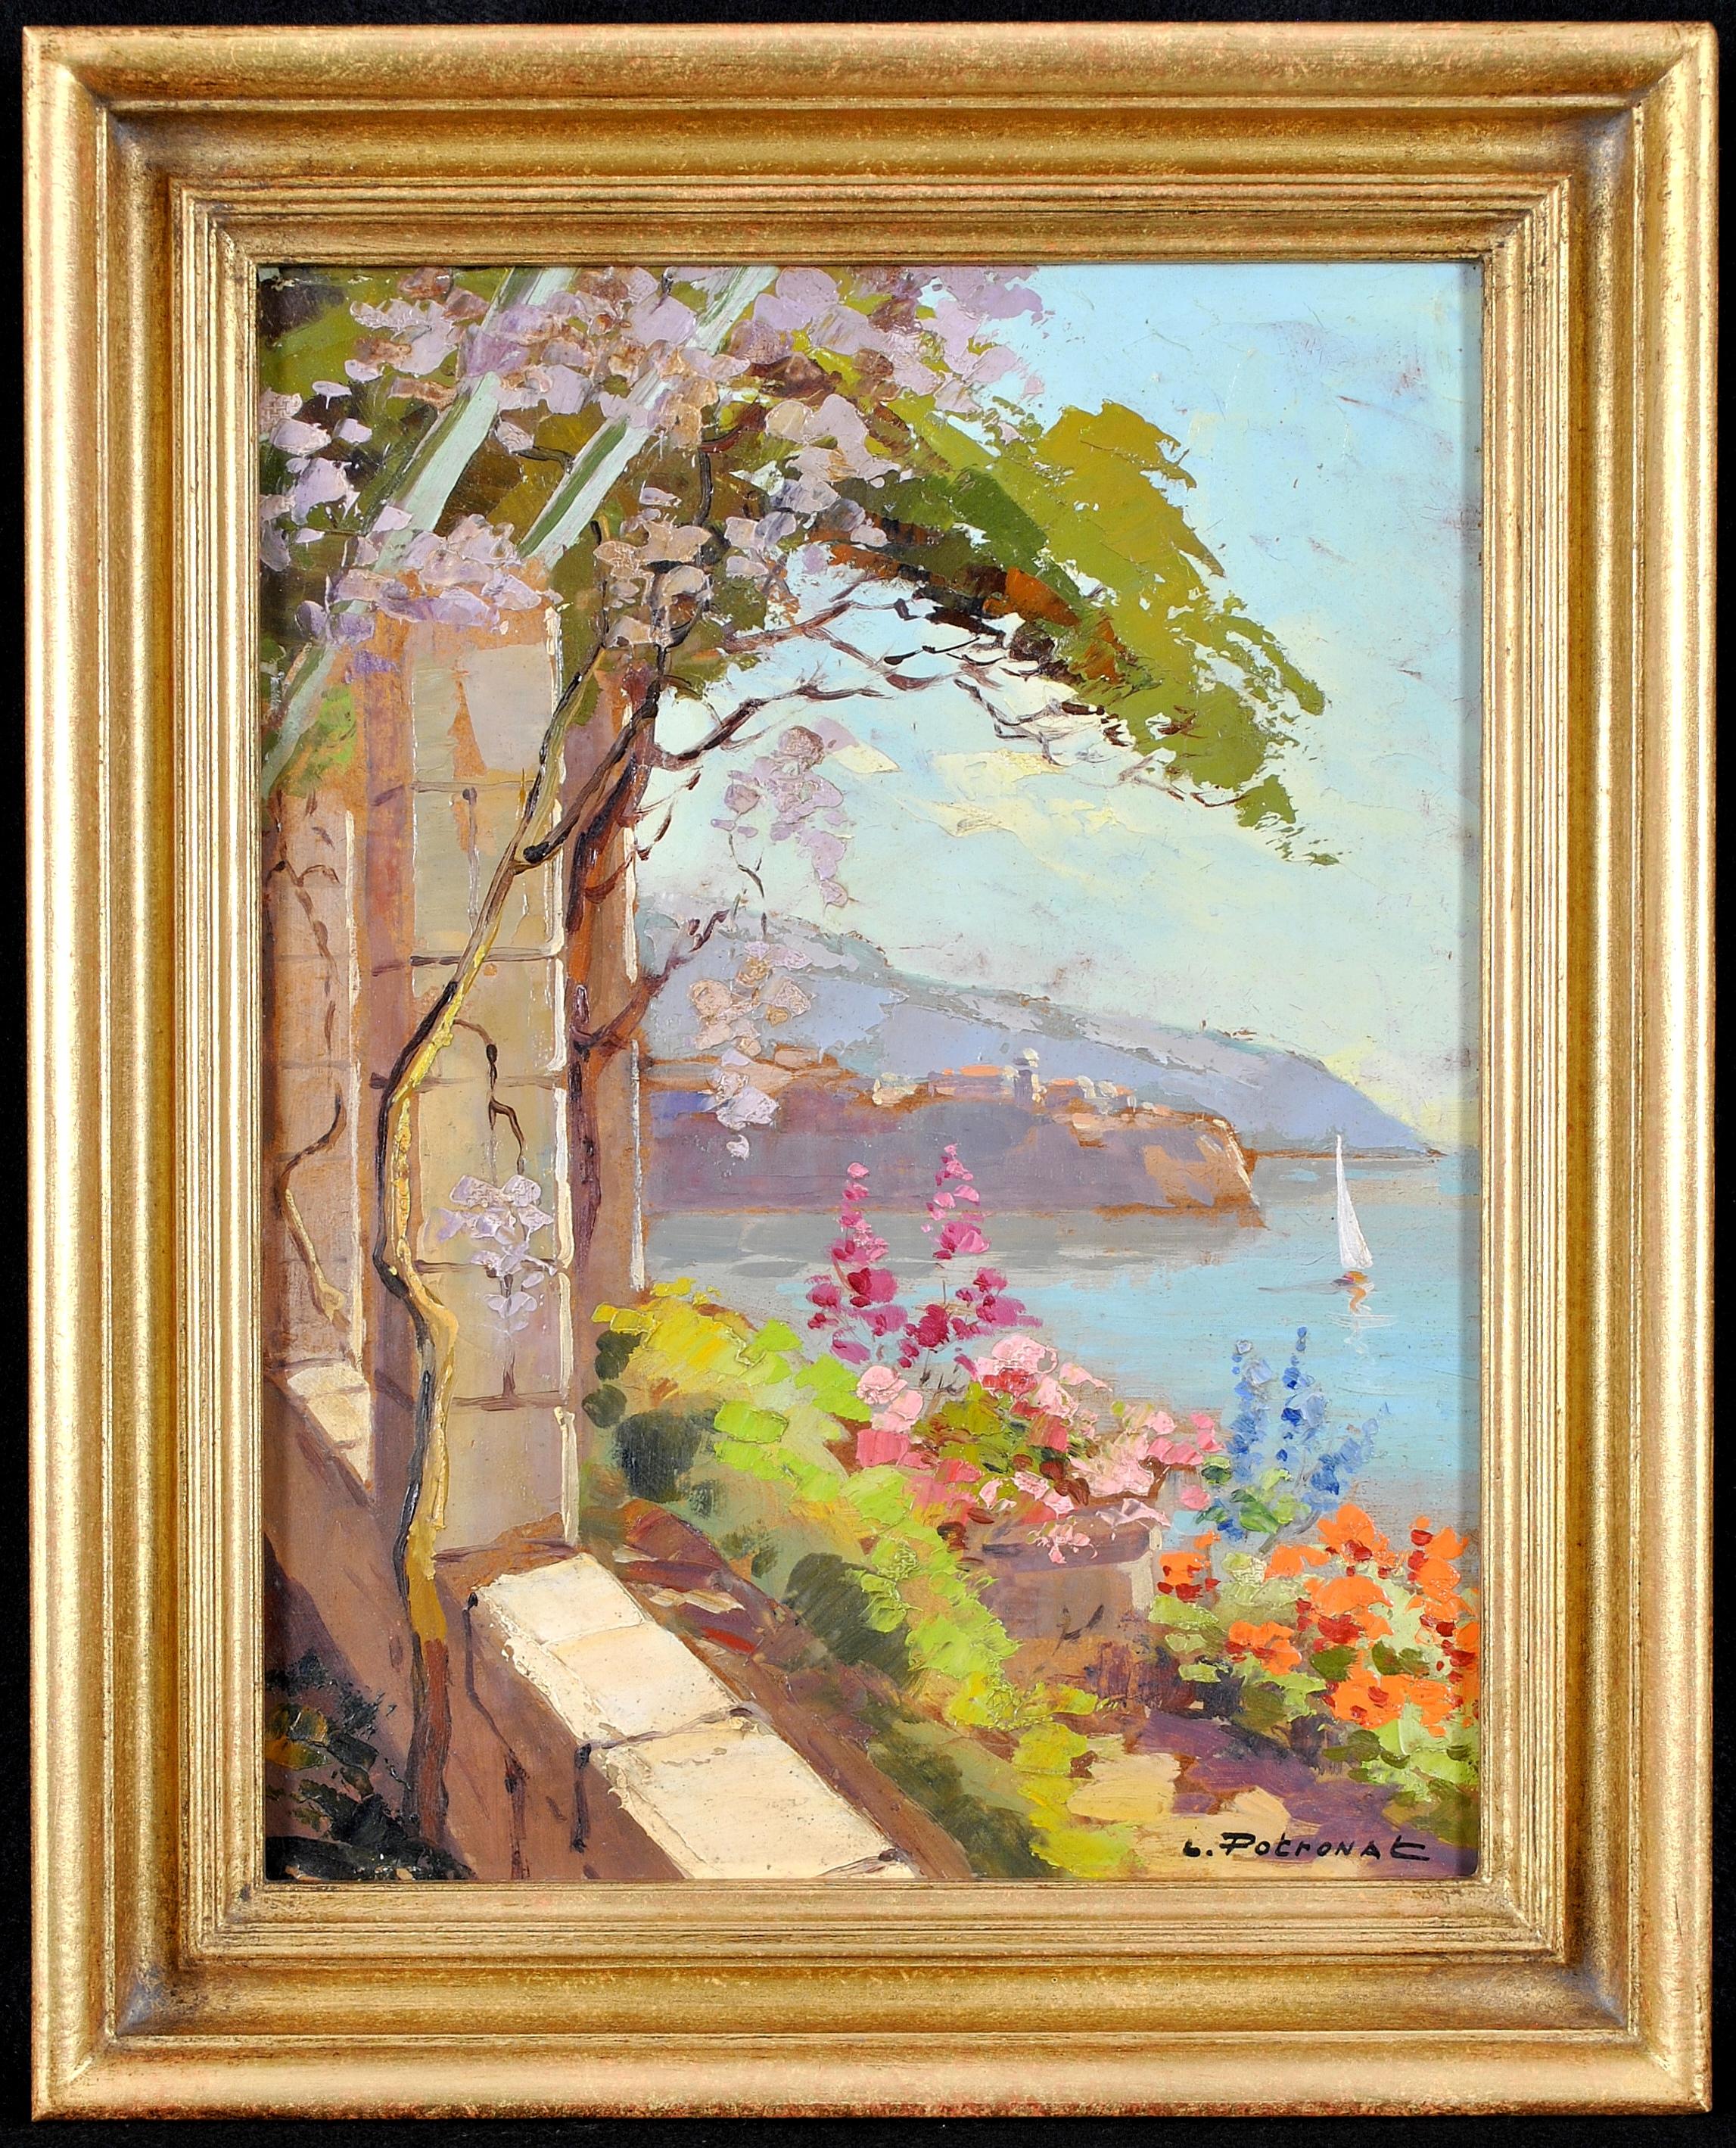 Lucien Potronat Landscape Painting - Cote d'Azur - French Riviera from Balcony Coastal Impressionist Oil Painting